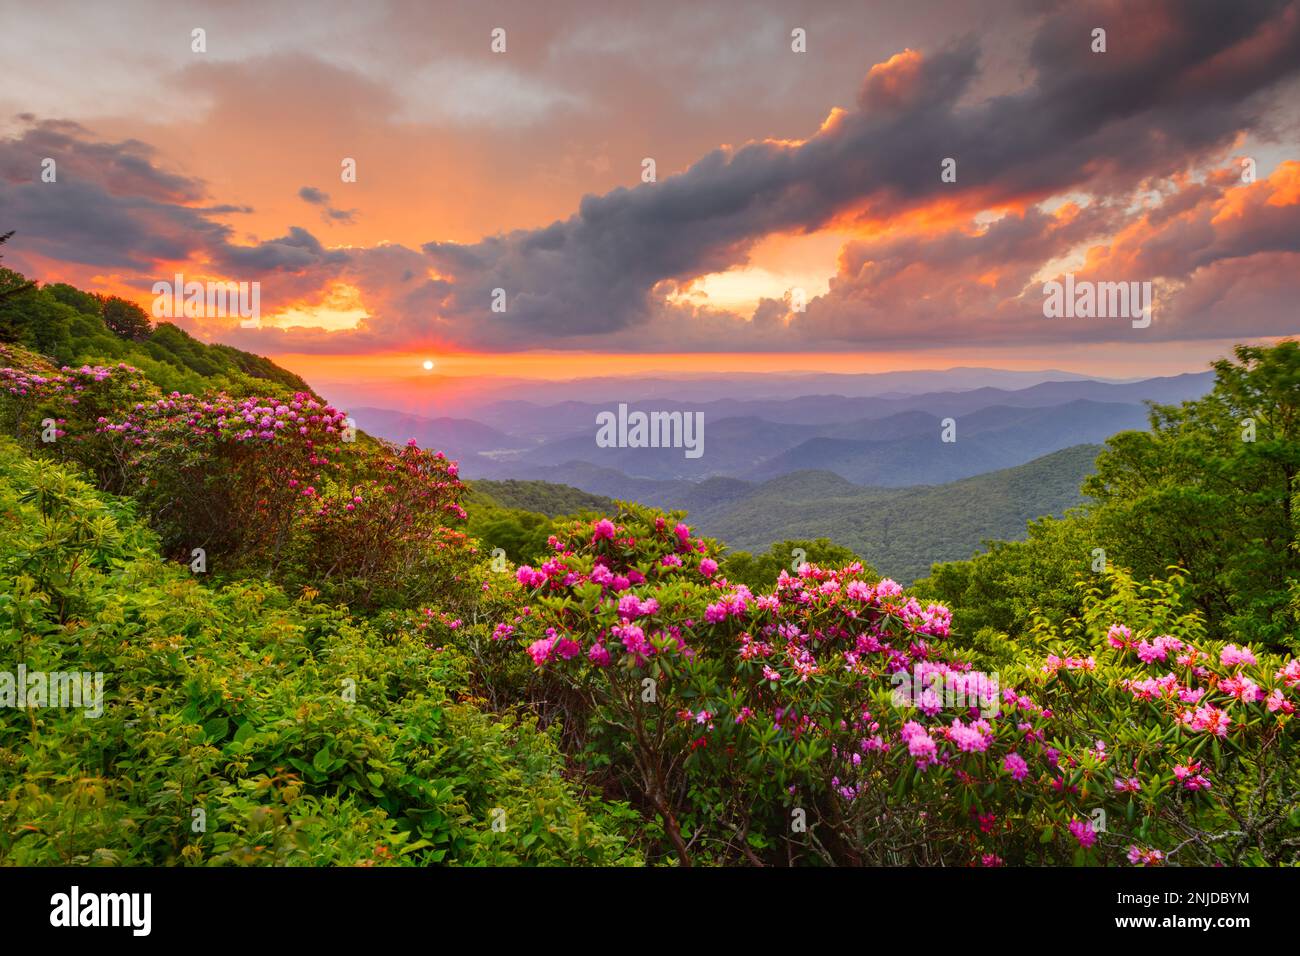 The Great Craggy Mountains along the Blue Ridge Parkway in North Carolina, USA with Catawba Rhododendron during a spring season sunset. Stock Photo